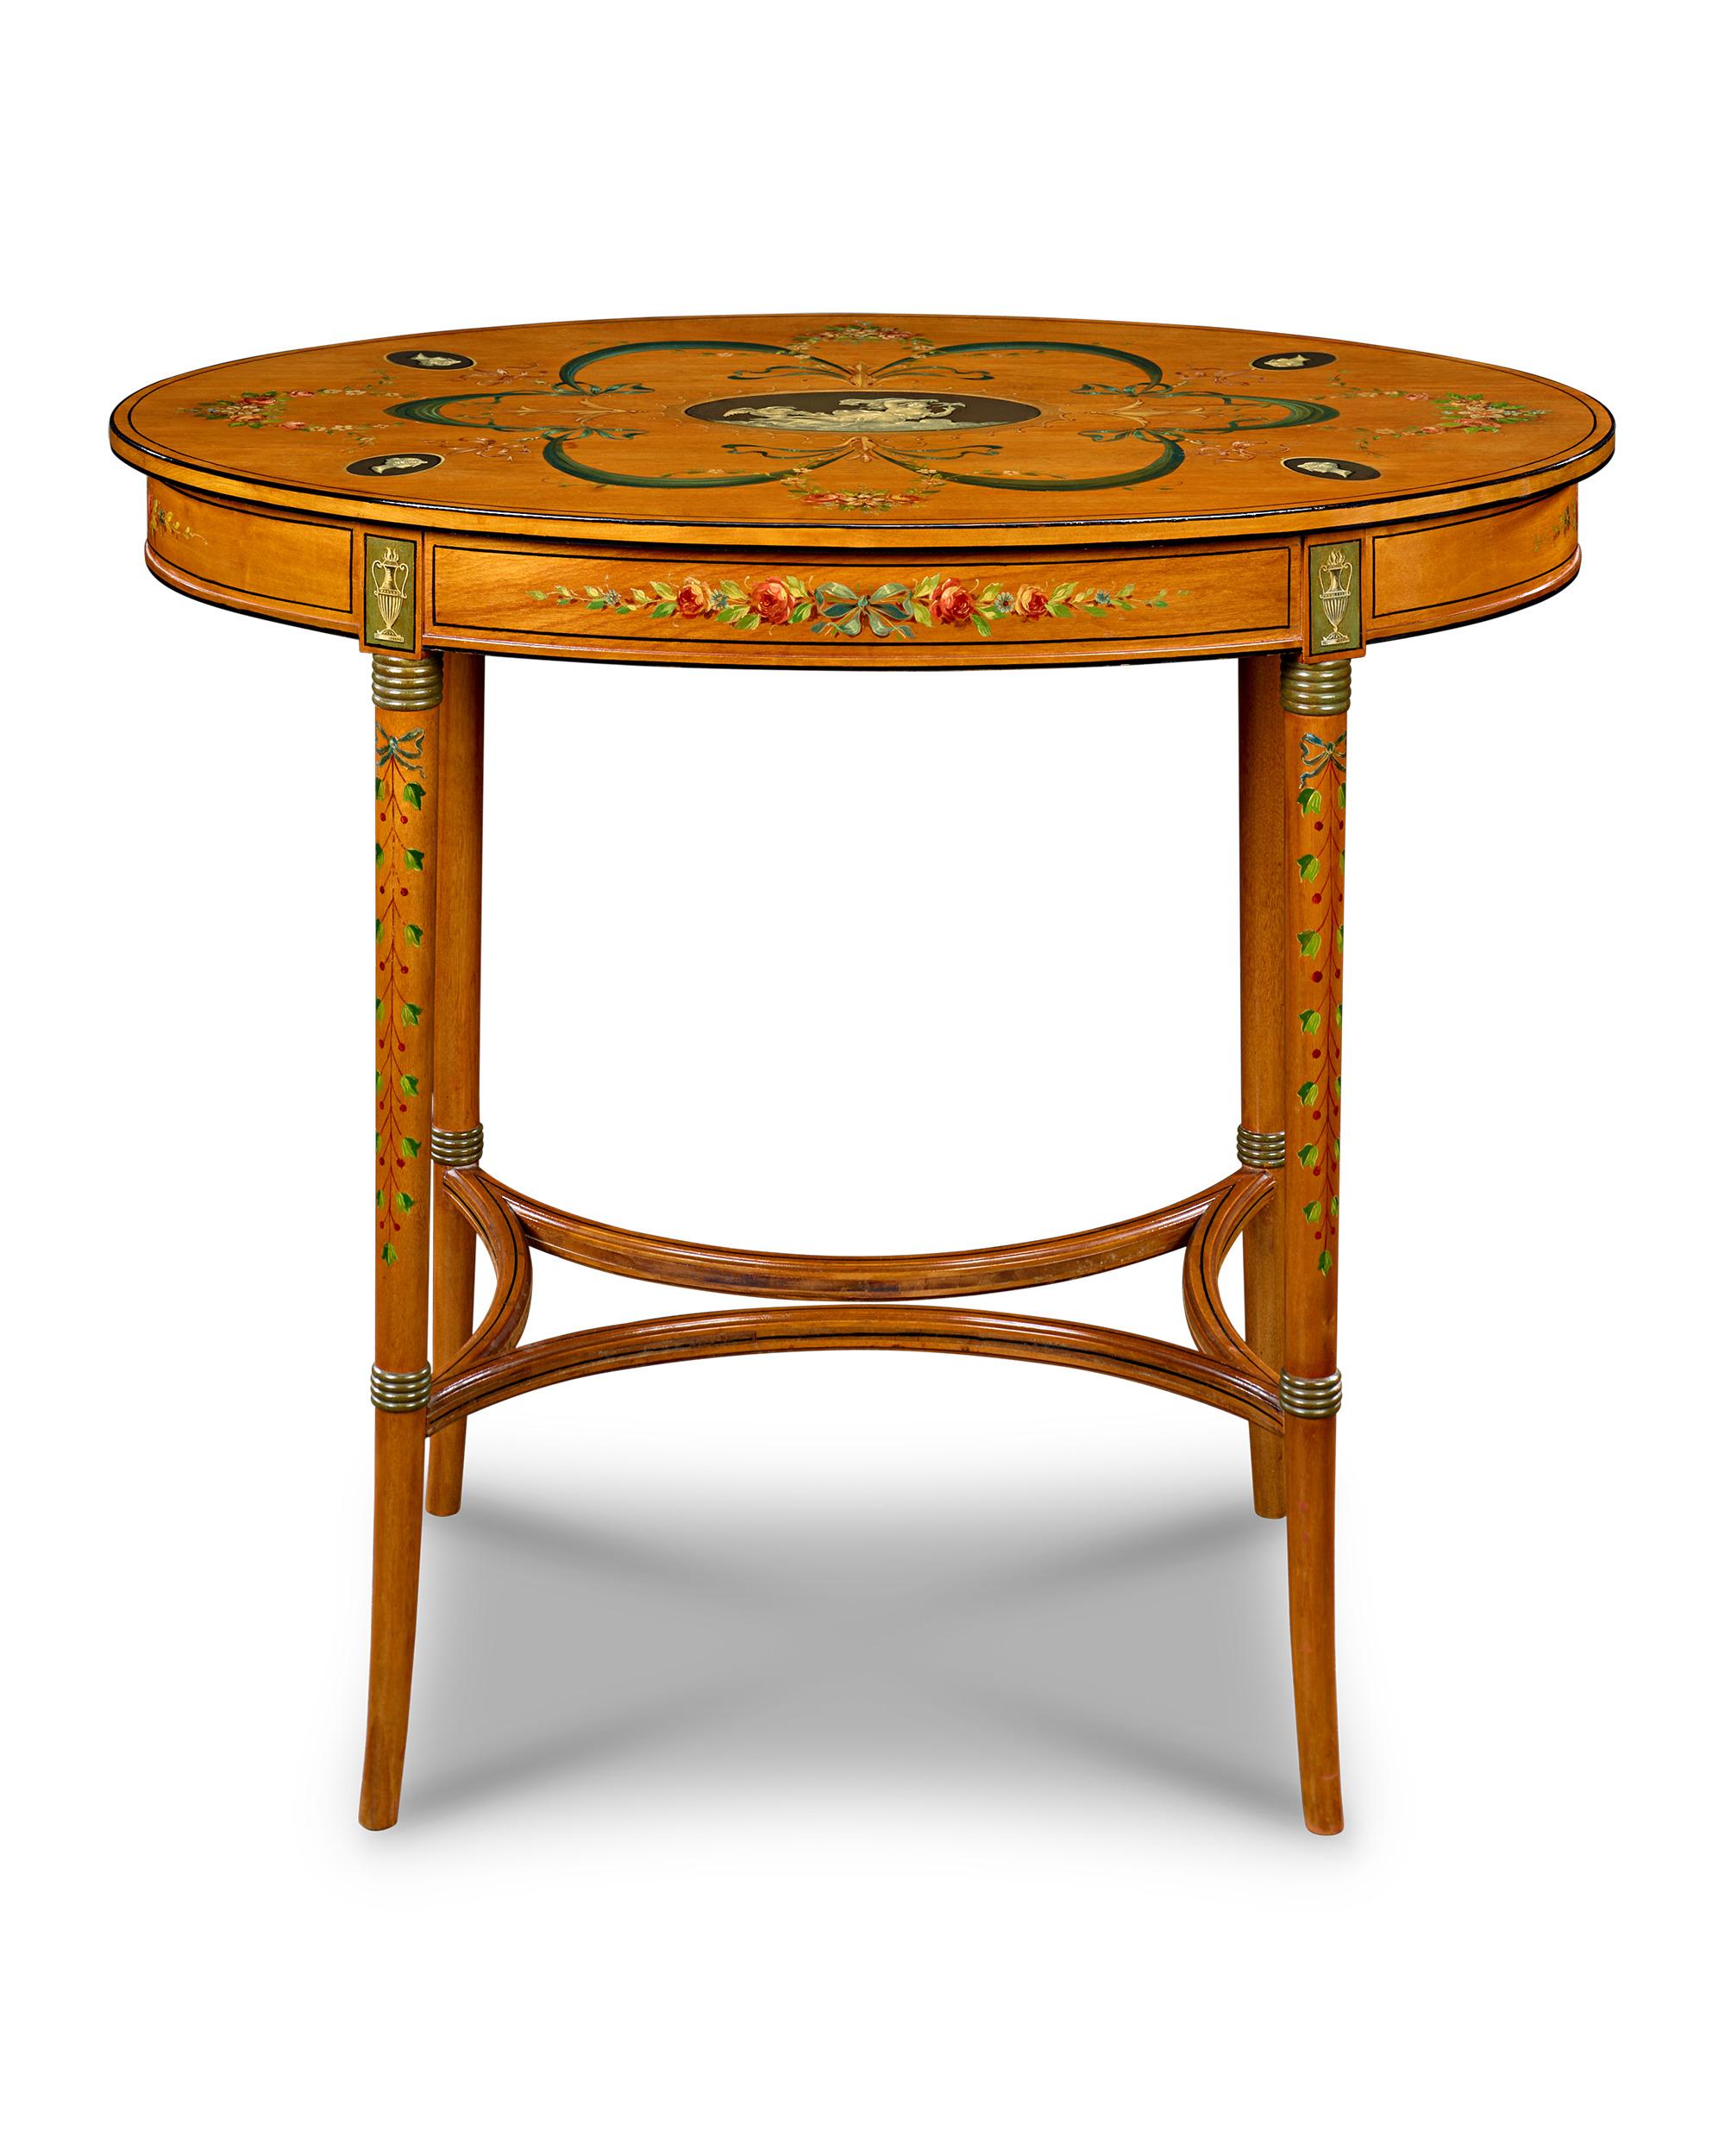 English Satinwood Parlor Tables In Excellent Condition For Sale In New Orleans, LA